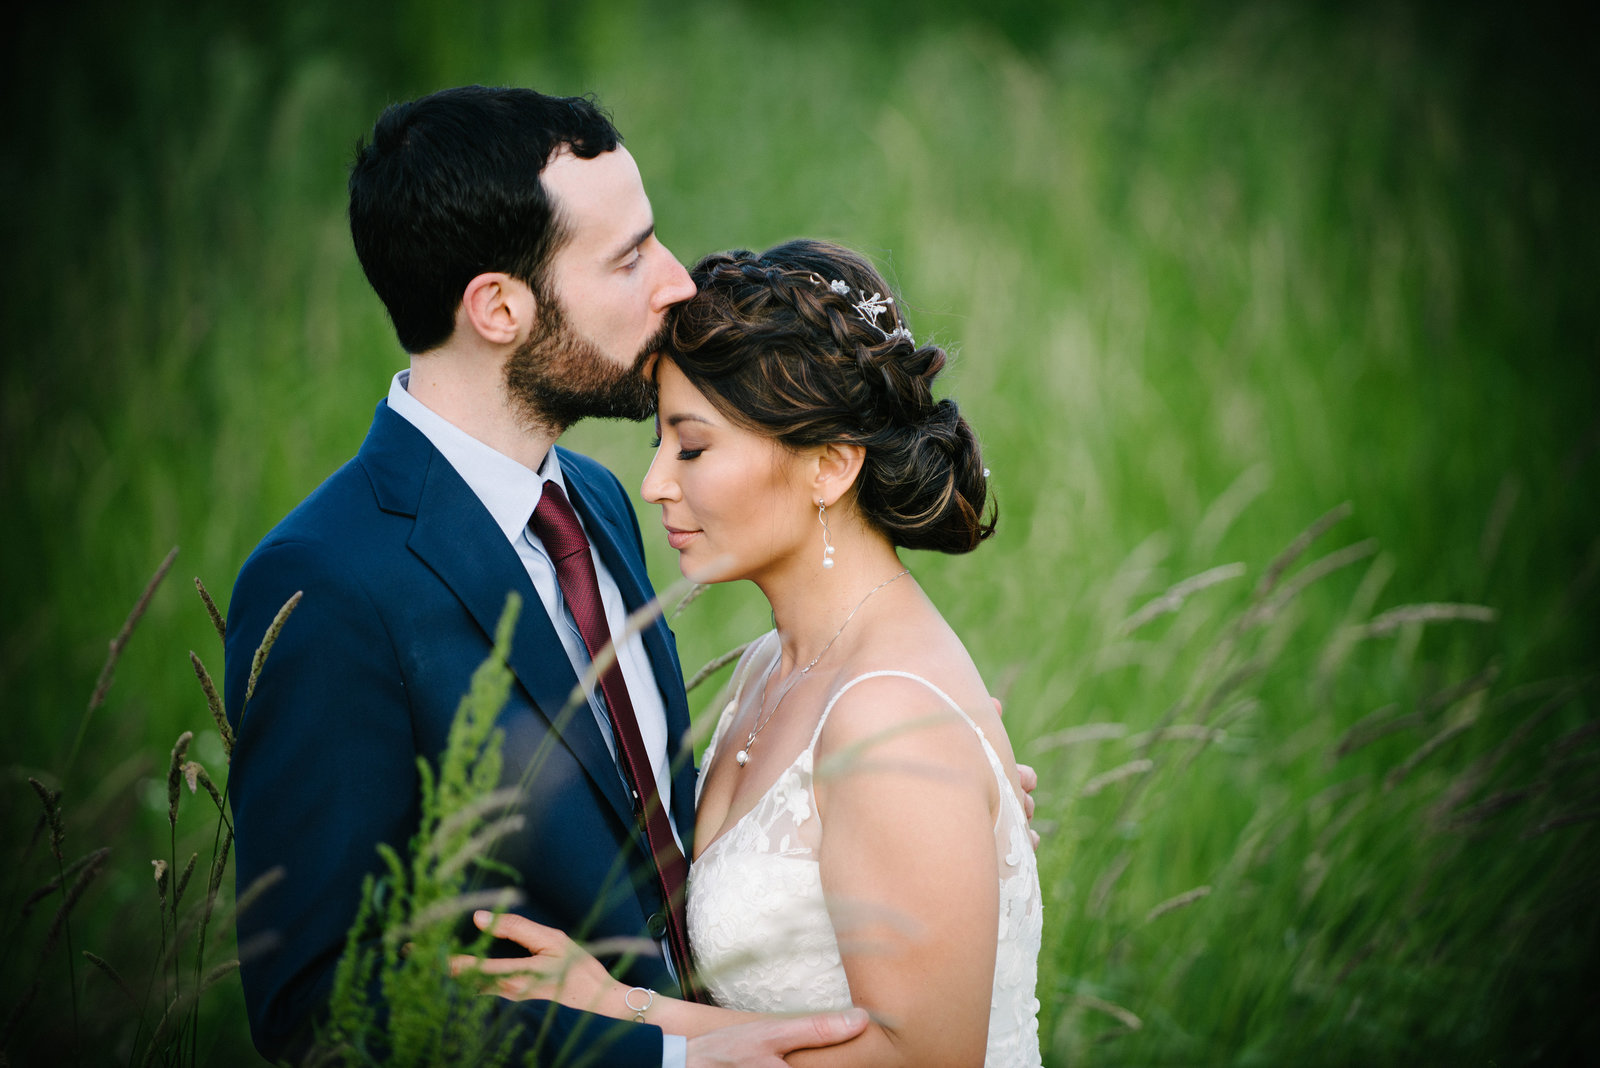 Romantic moment between bride and groom in a field of green